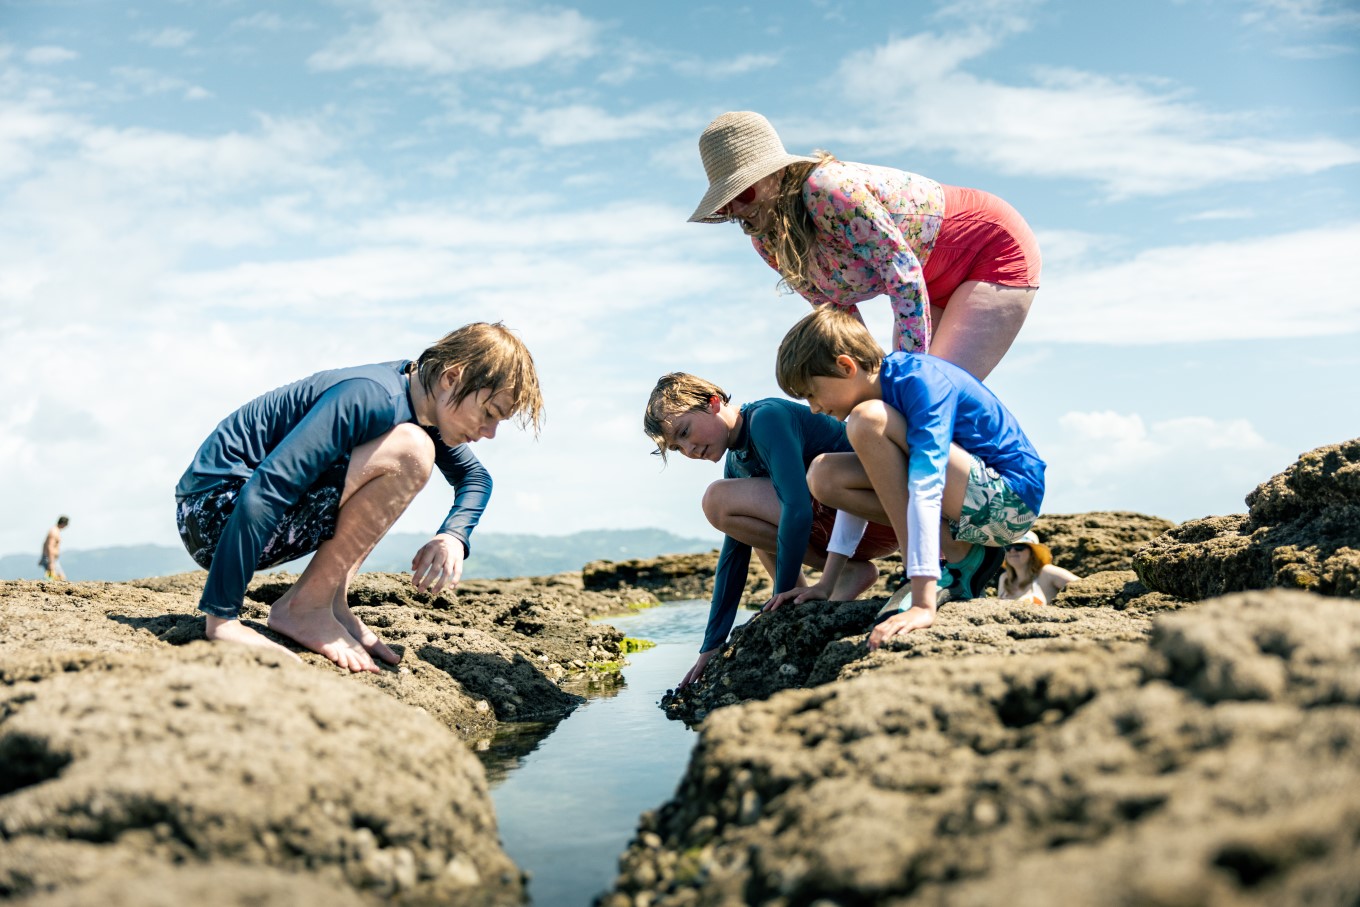 Go rock pooling at Tāwharanui Regional Park and discover mini marine ecosystems - you might even spot an octopus!